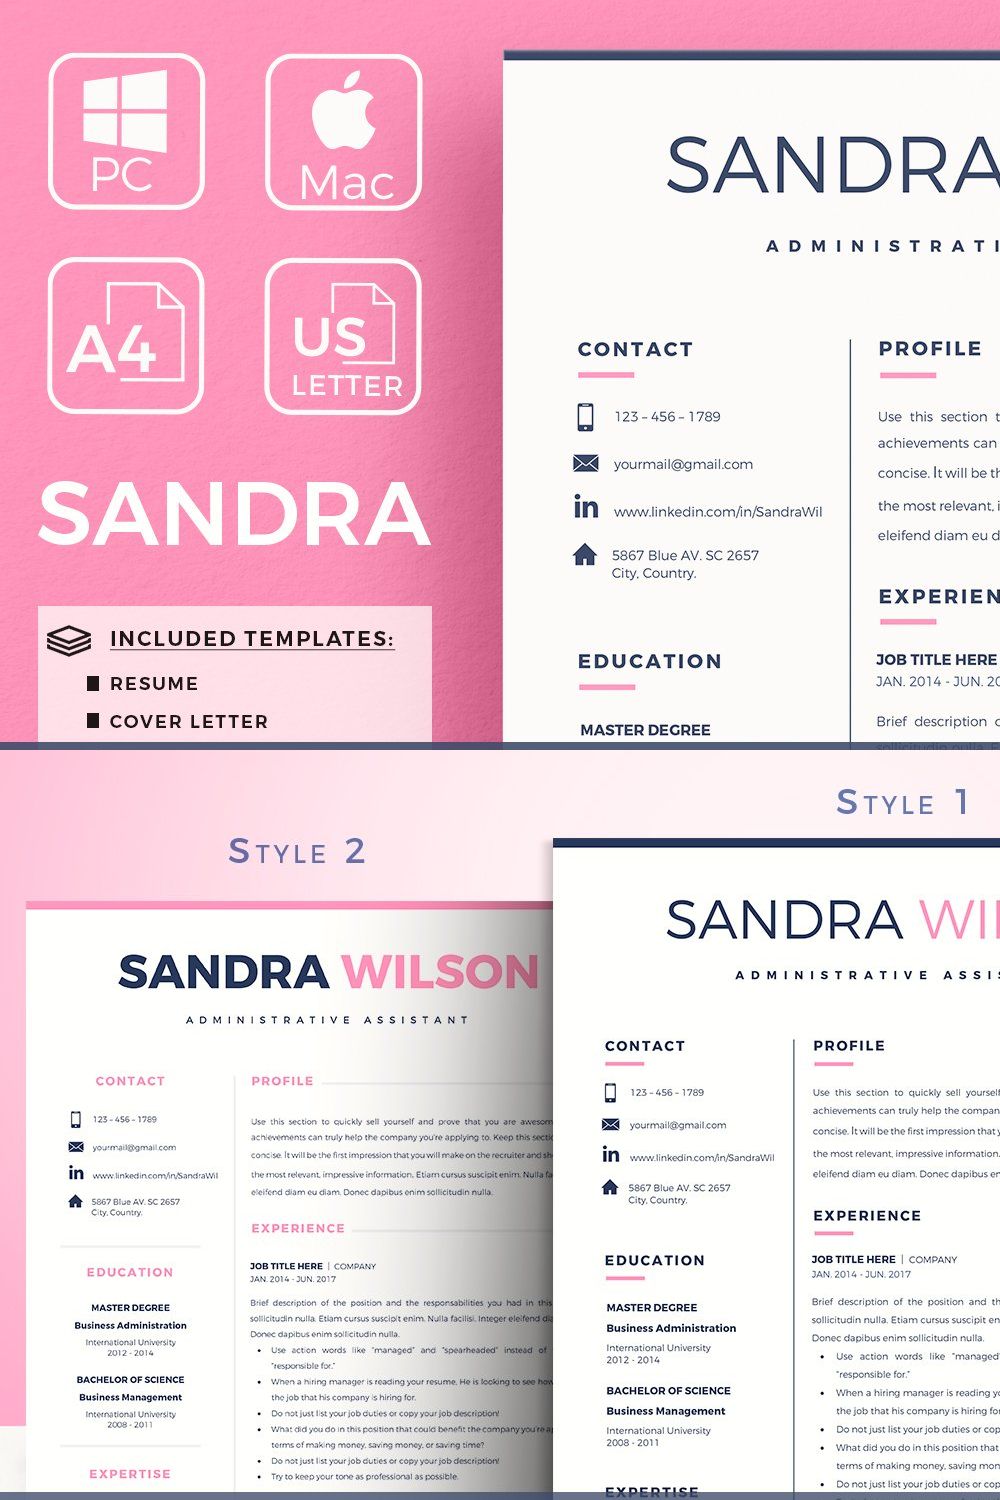 Administrative Assistant Resume CV pinterest preview image.